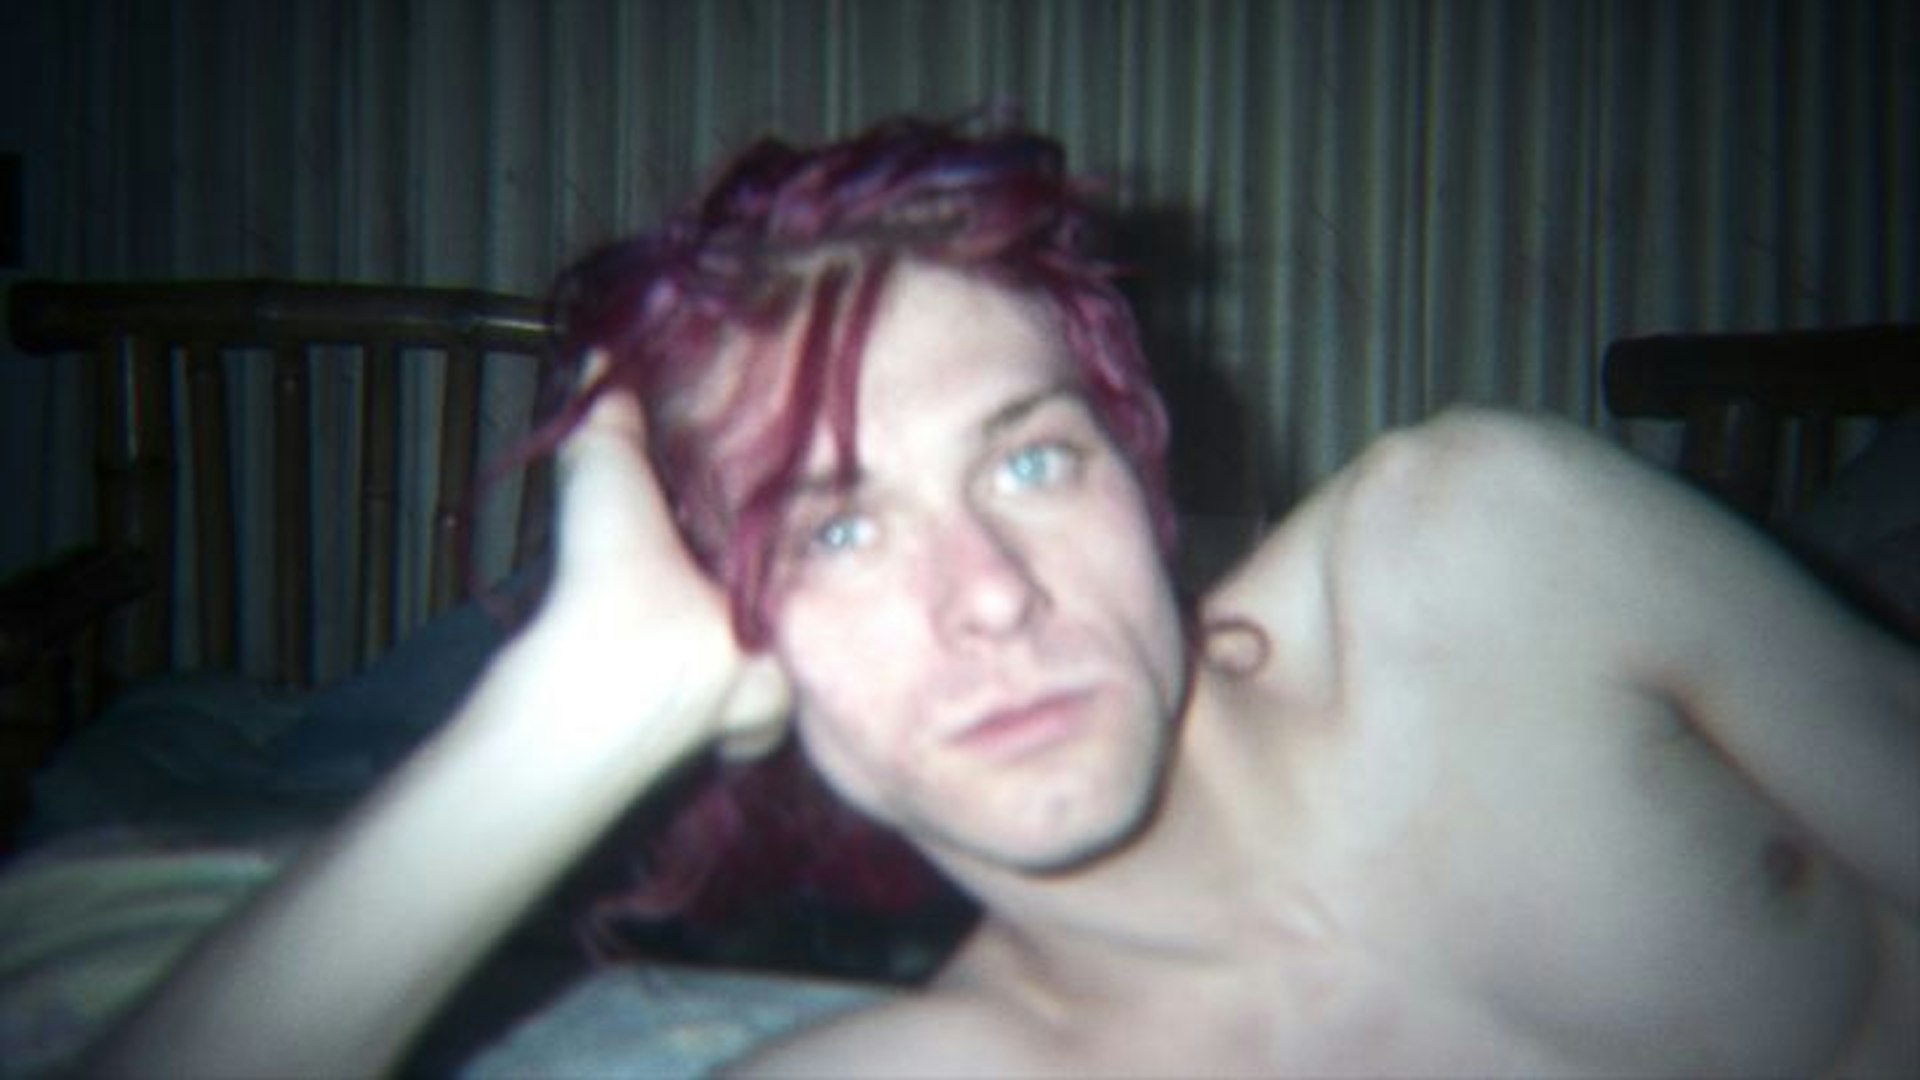 Can the first official Kurt Cobain documentary tell us anything we don't already know?